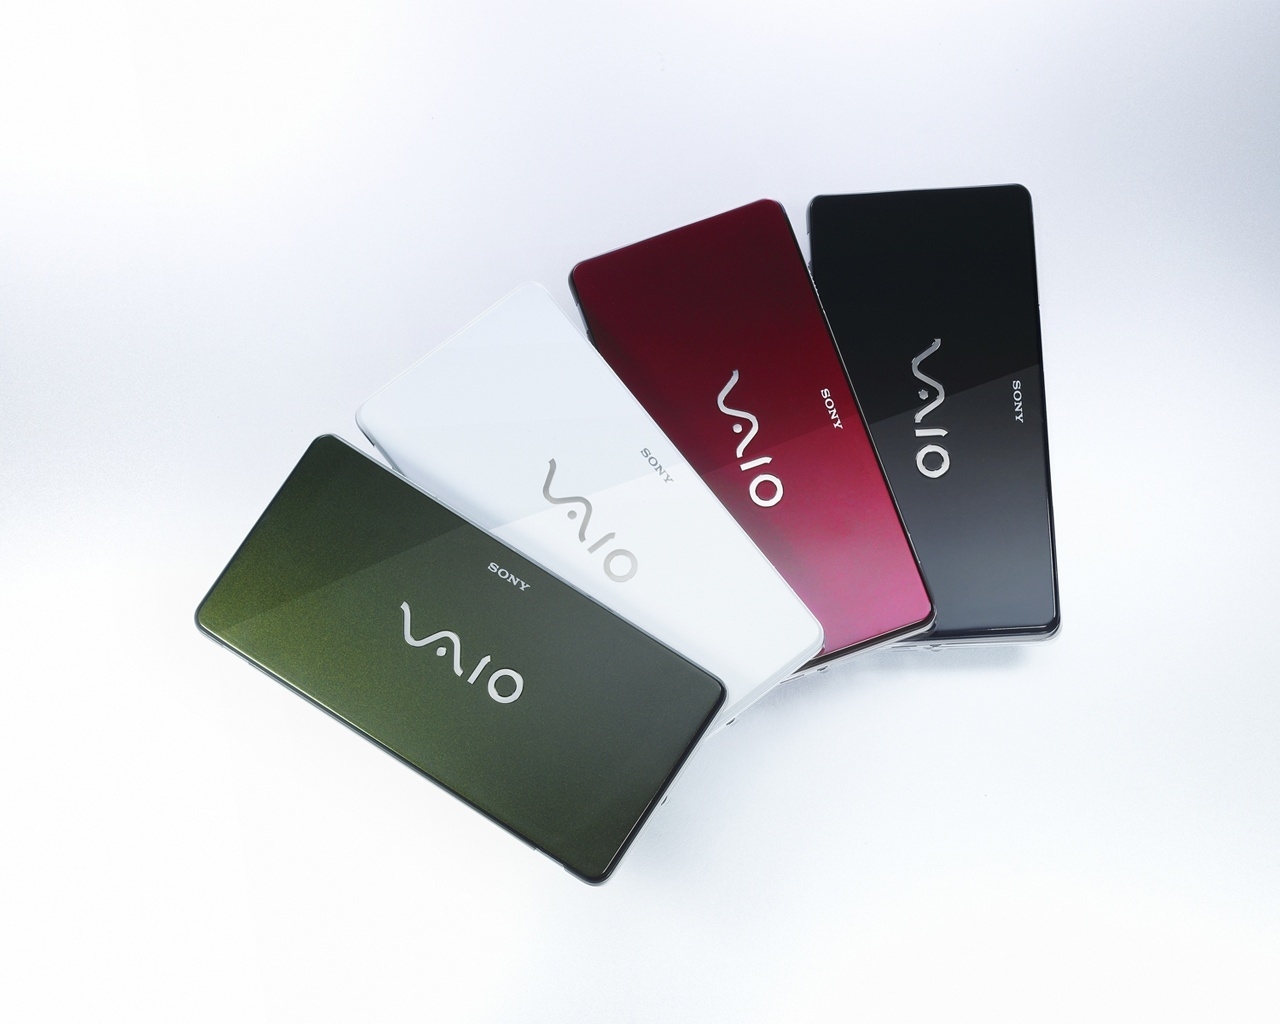 Sony Vaio 4 great colors for 1280 x 1024 resolution